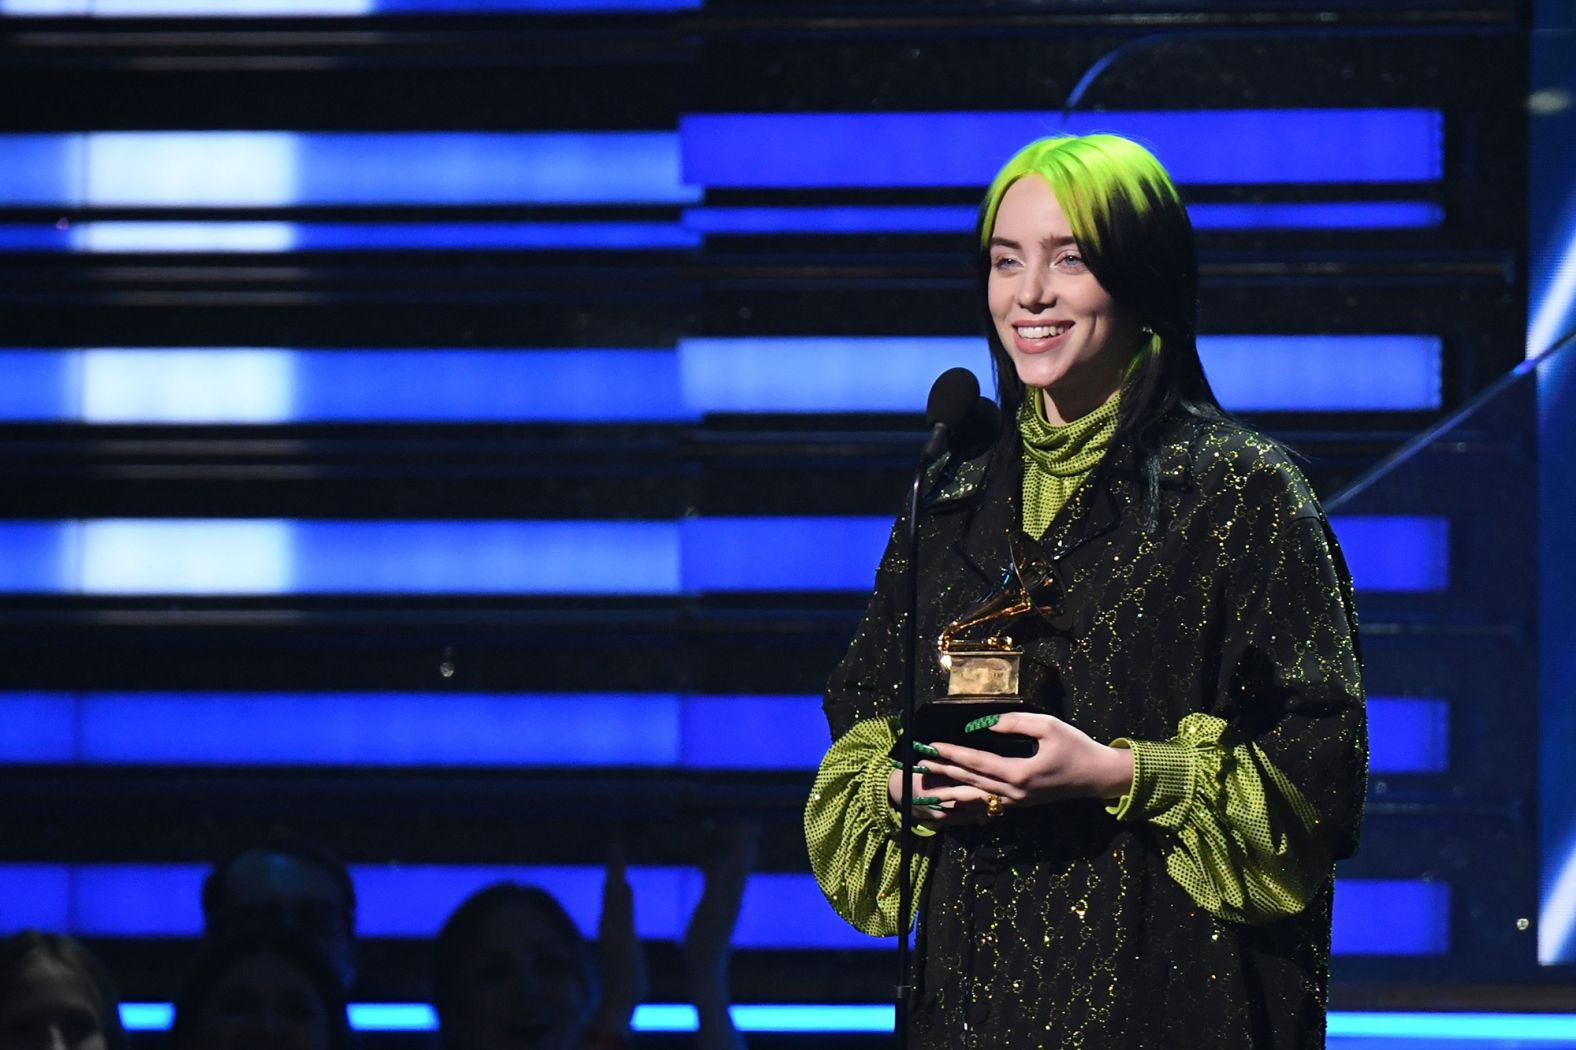 Billie Eilish receives the award for song of the year.